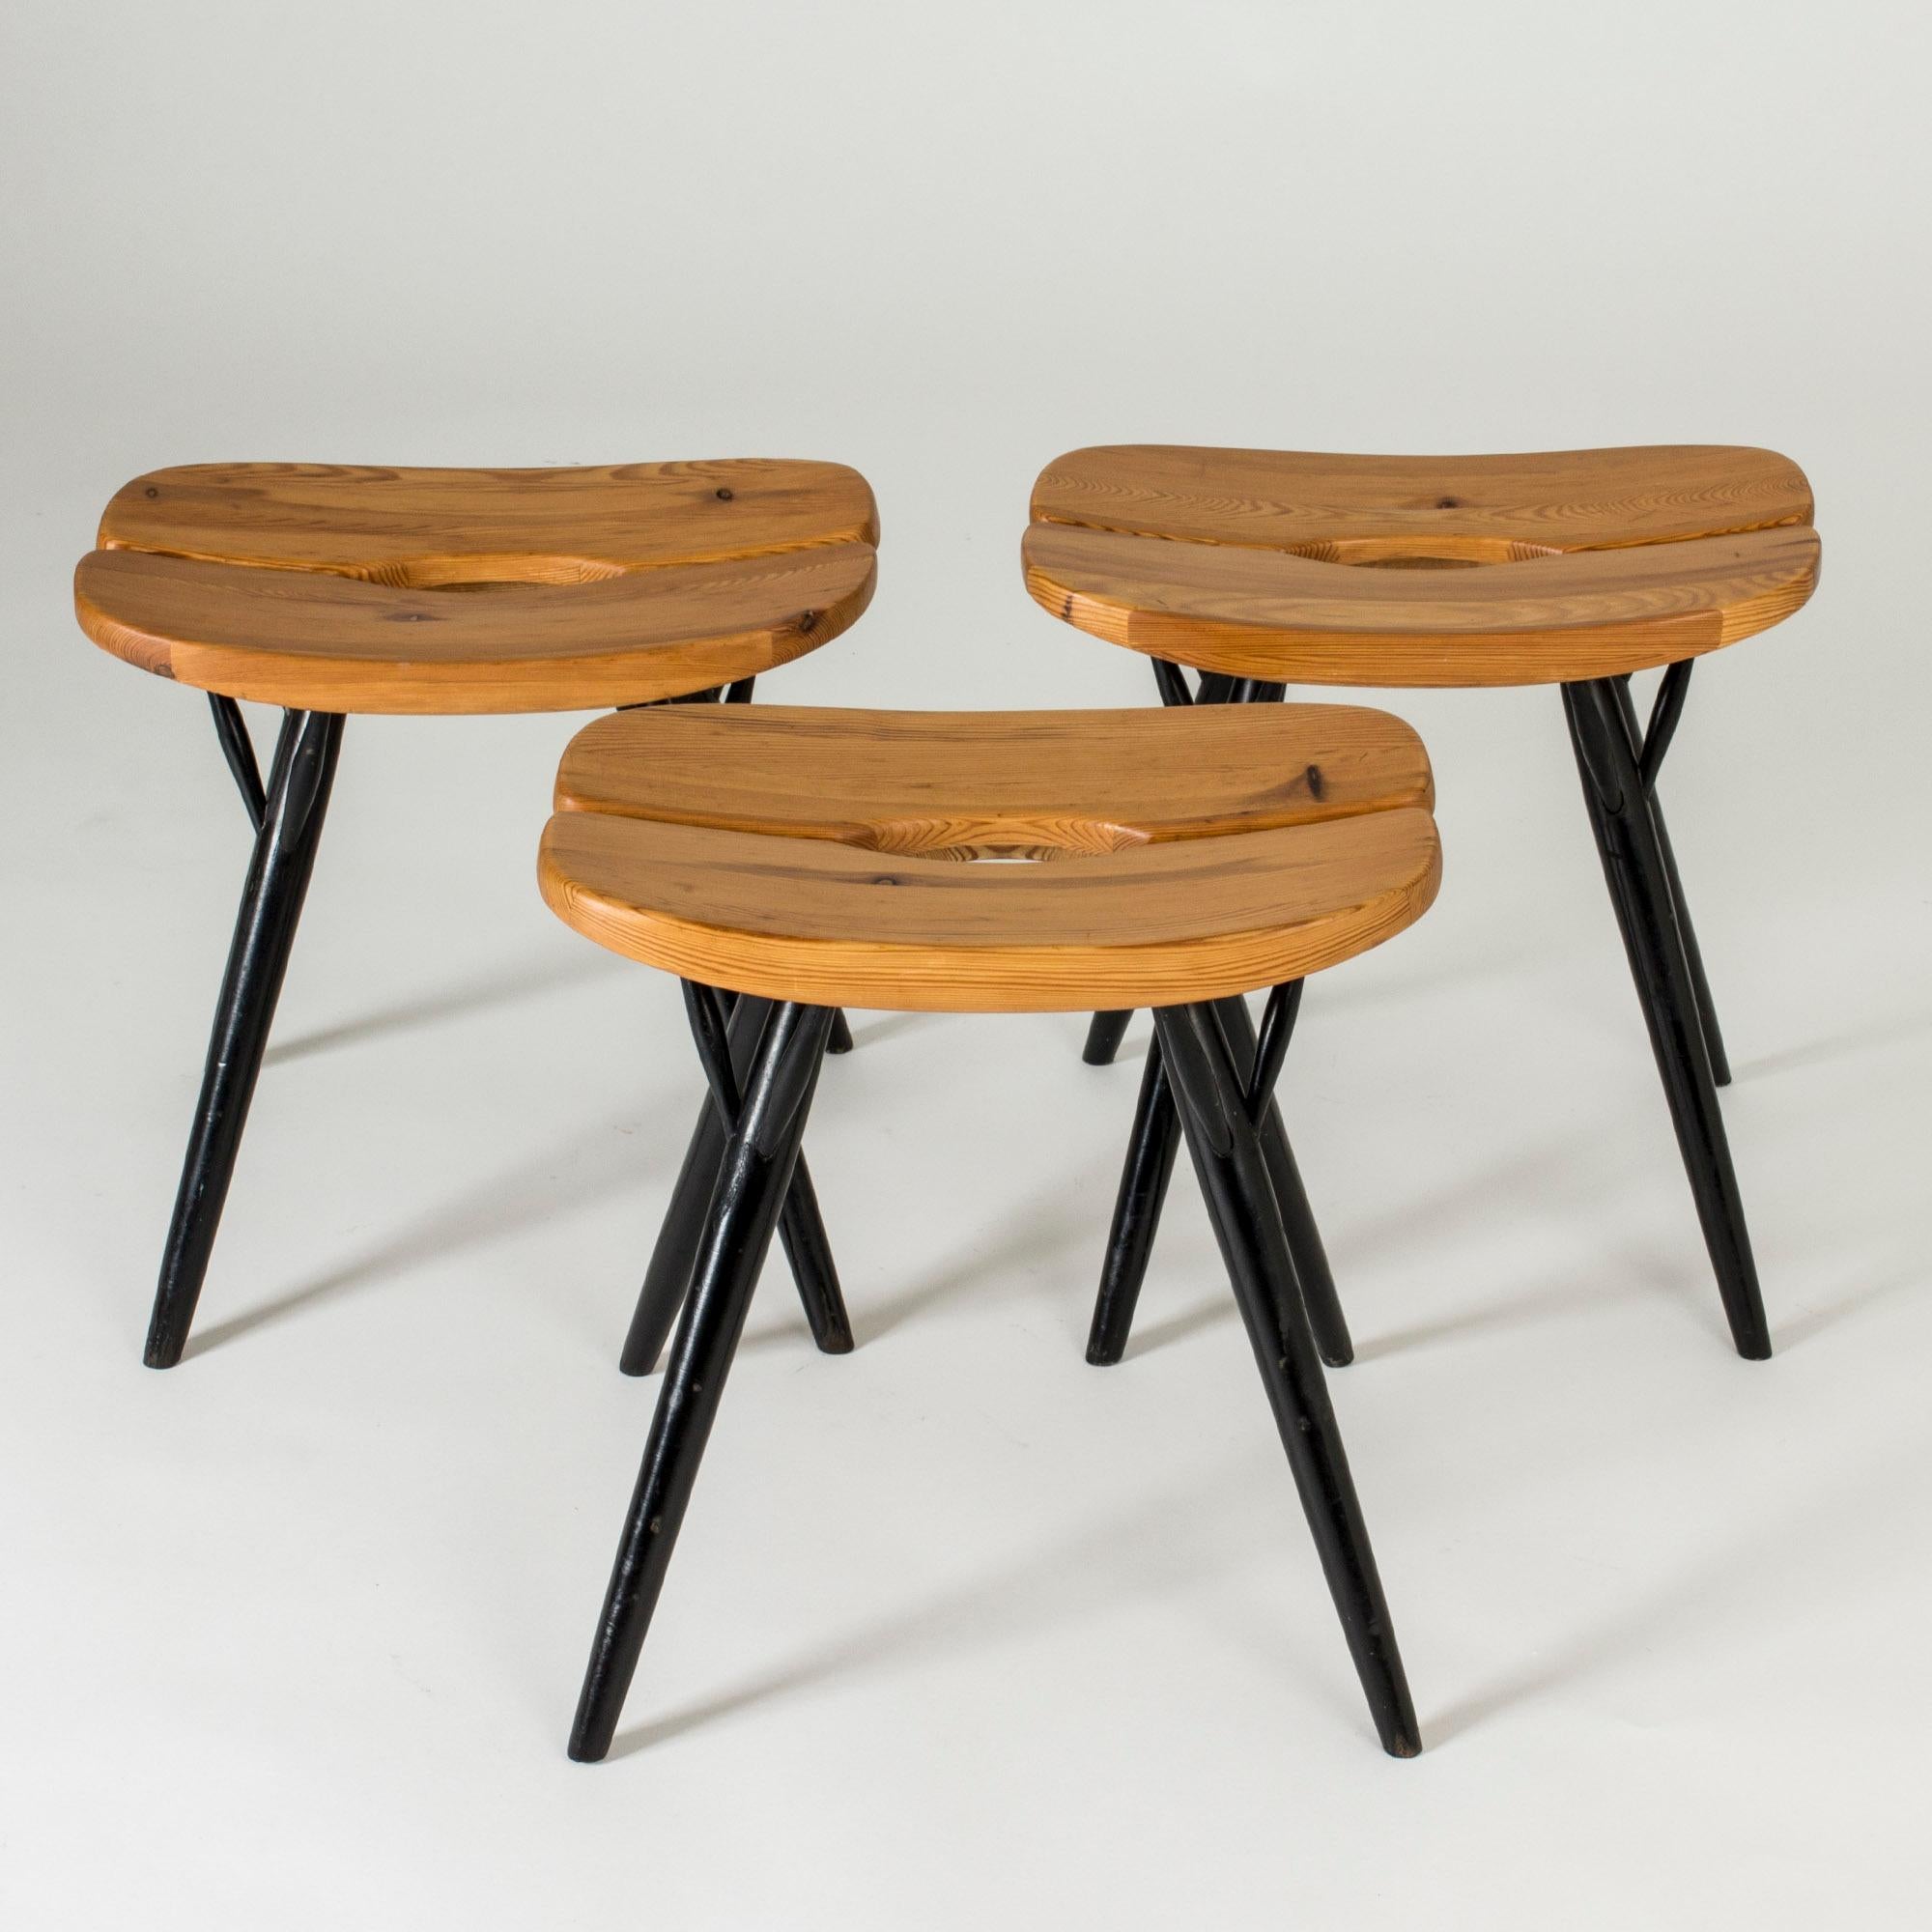 Set of three stools by Ilmari Tapiovaara, from the furniture line “Pirkka”. Cool, rounded design with pine seats and black lacquered legs.